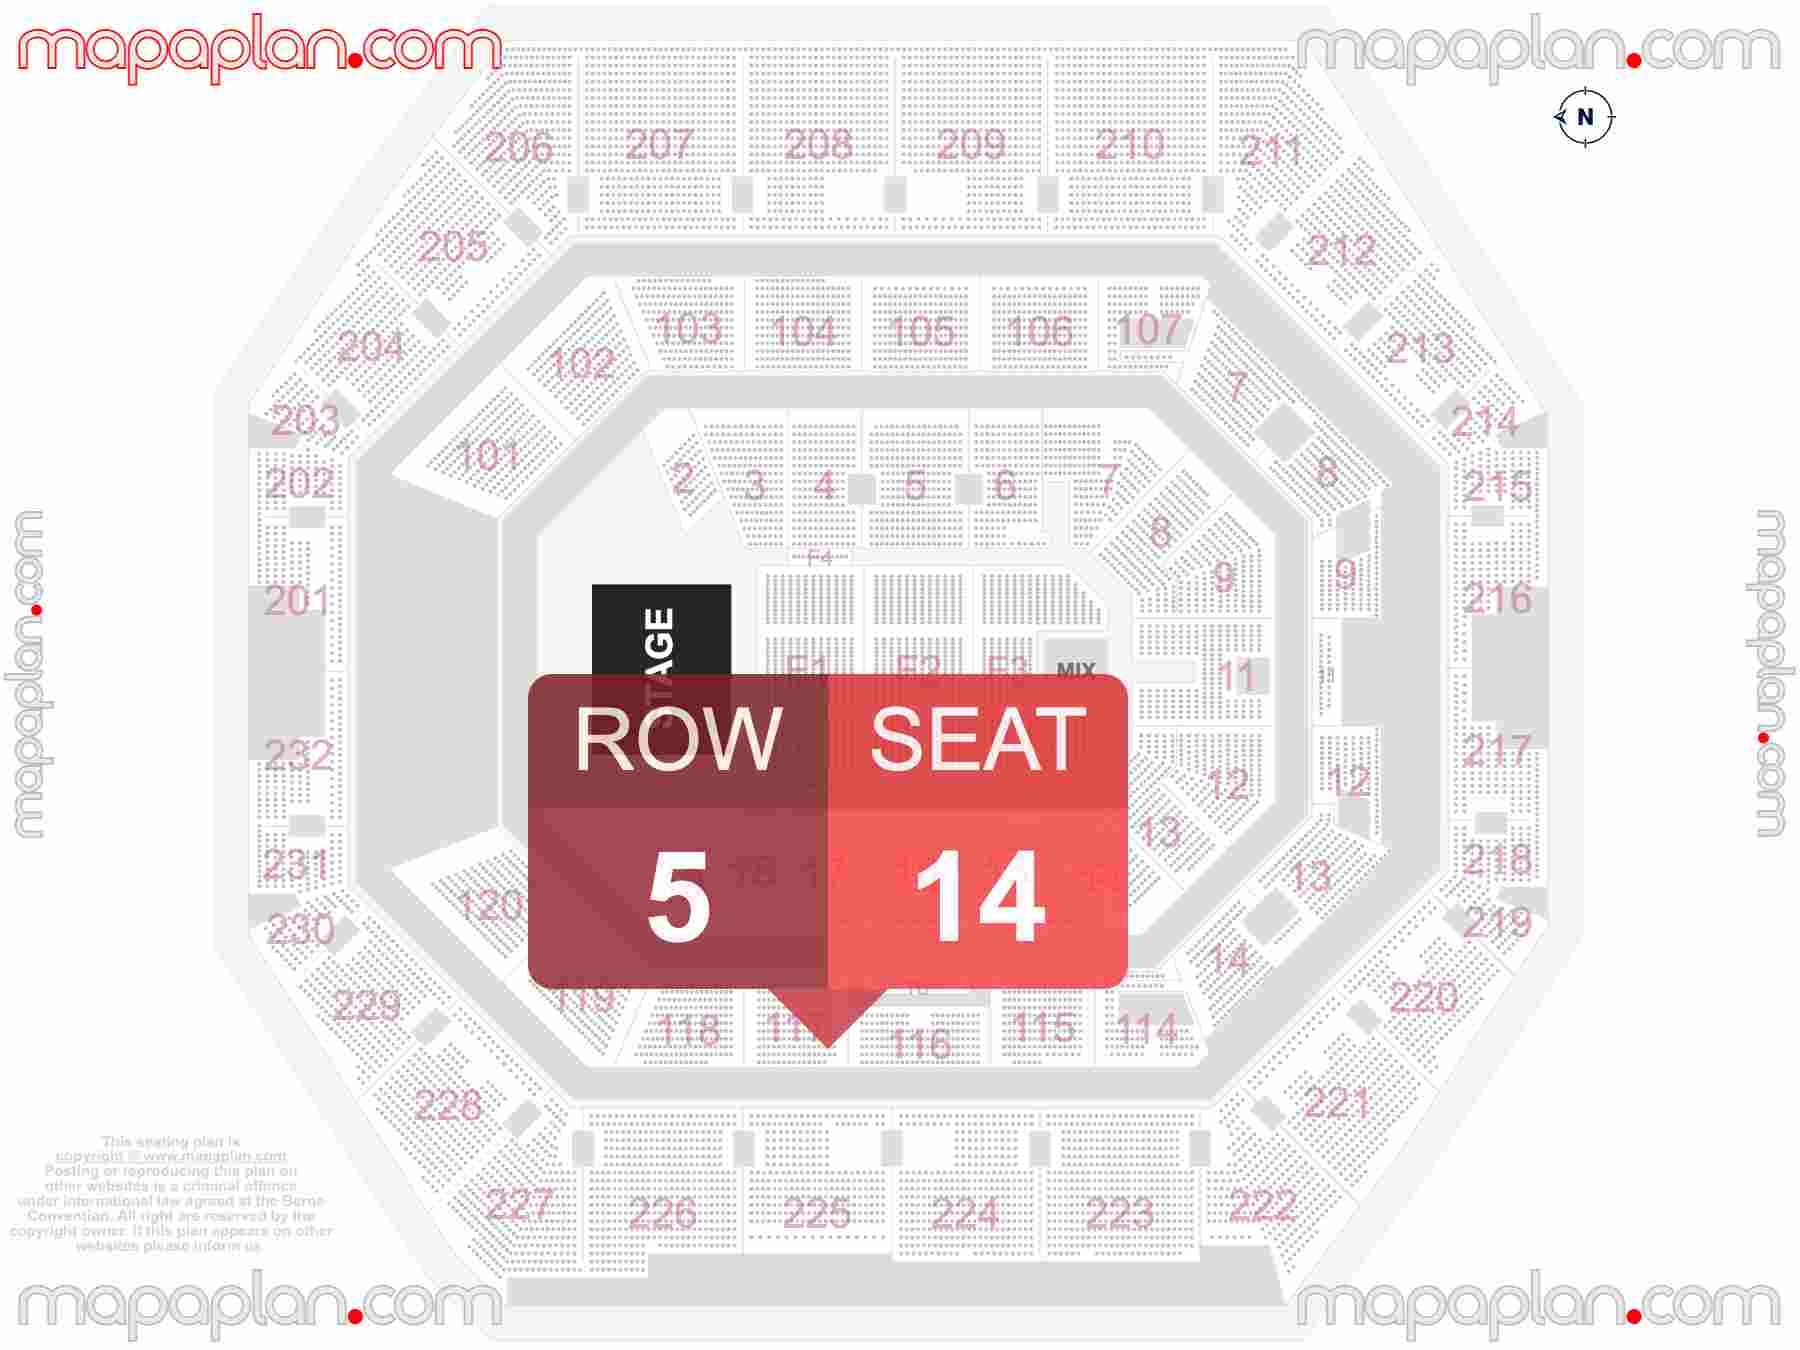 Indianapolis Gainbridge Fieldhouse seating chart Concert detailed seat numbers and row numbering chart with interactive map plan layout